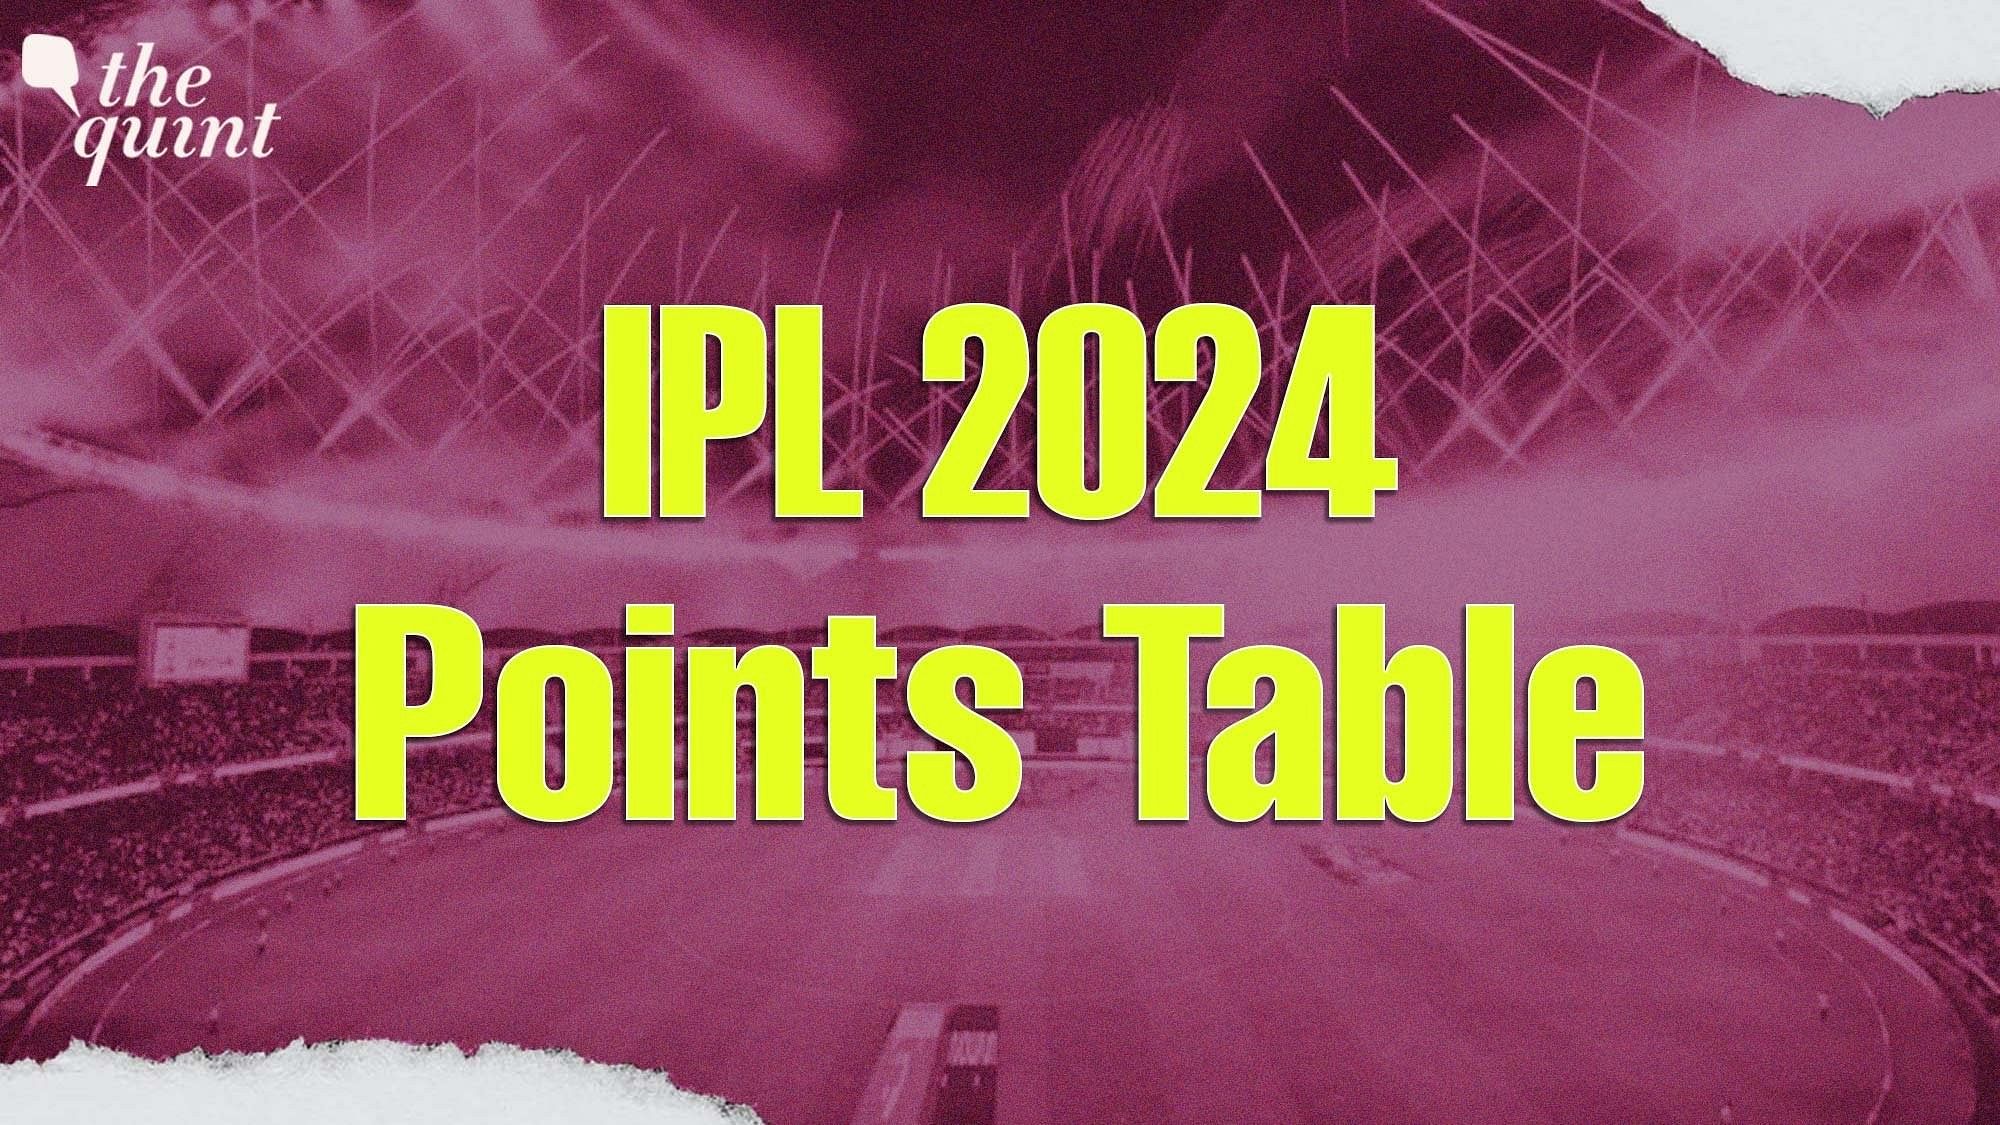 <div class="paragraphs"><p>IPL 2024 Points Table: Latest and Updated Position of All Teams After RCB vs PBKS match on 25 March 2024.</p></div>